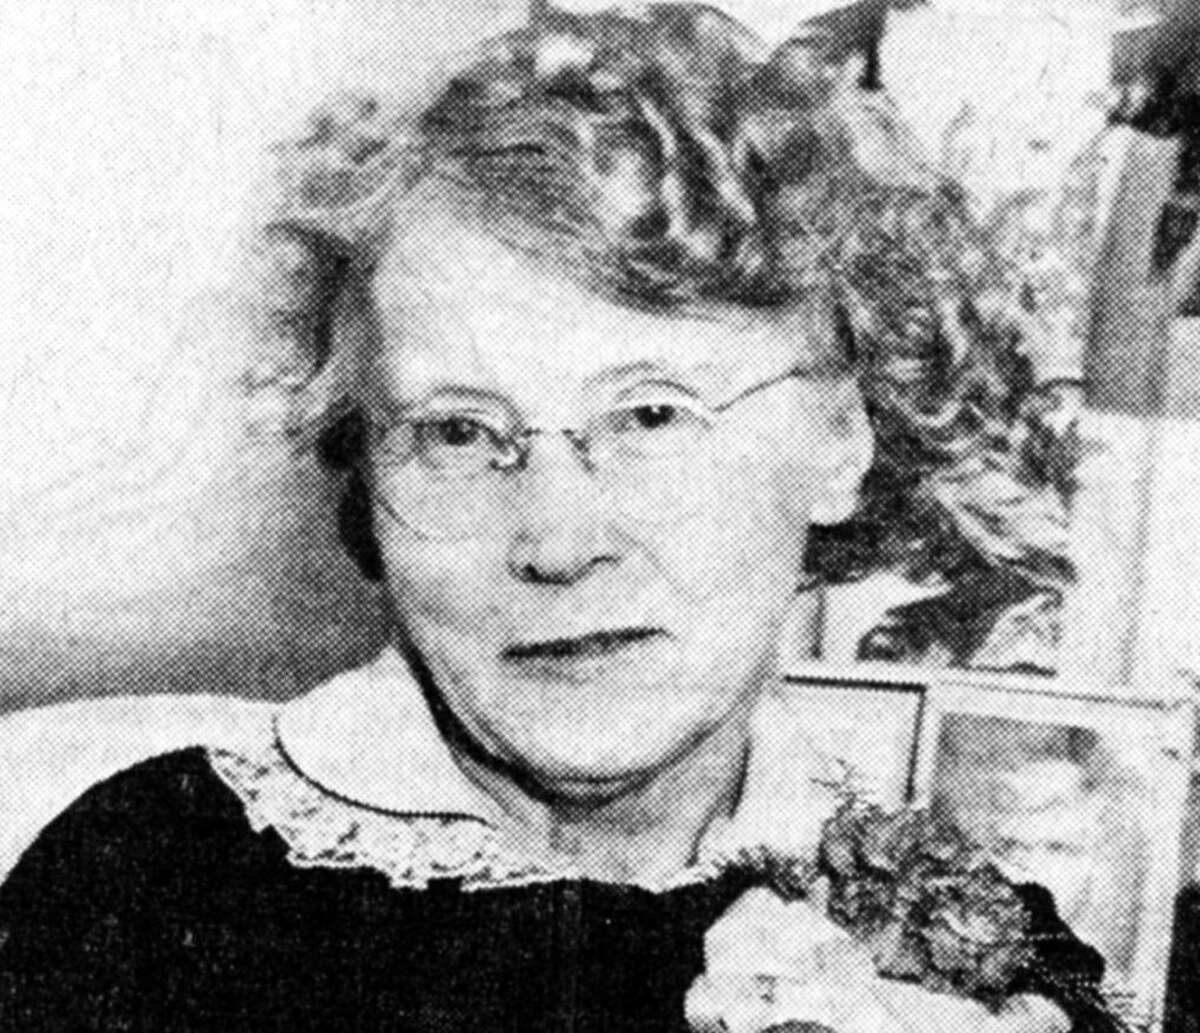 Margaret Savers was honored on her retirement from the Eastlake Post Office. The photo was published in the News Advocate on Feb.14, 1962.